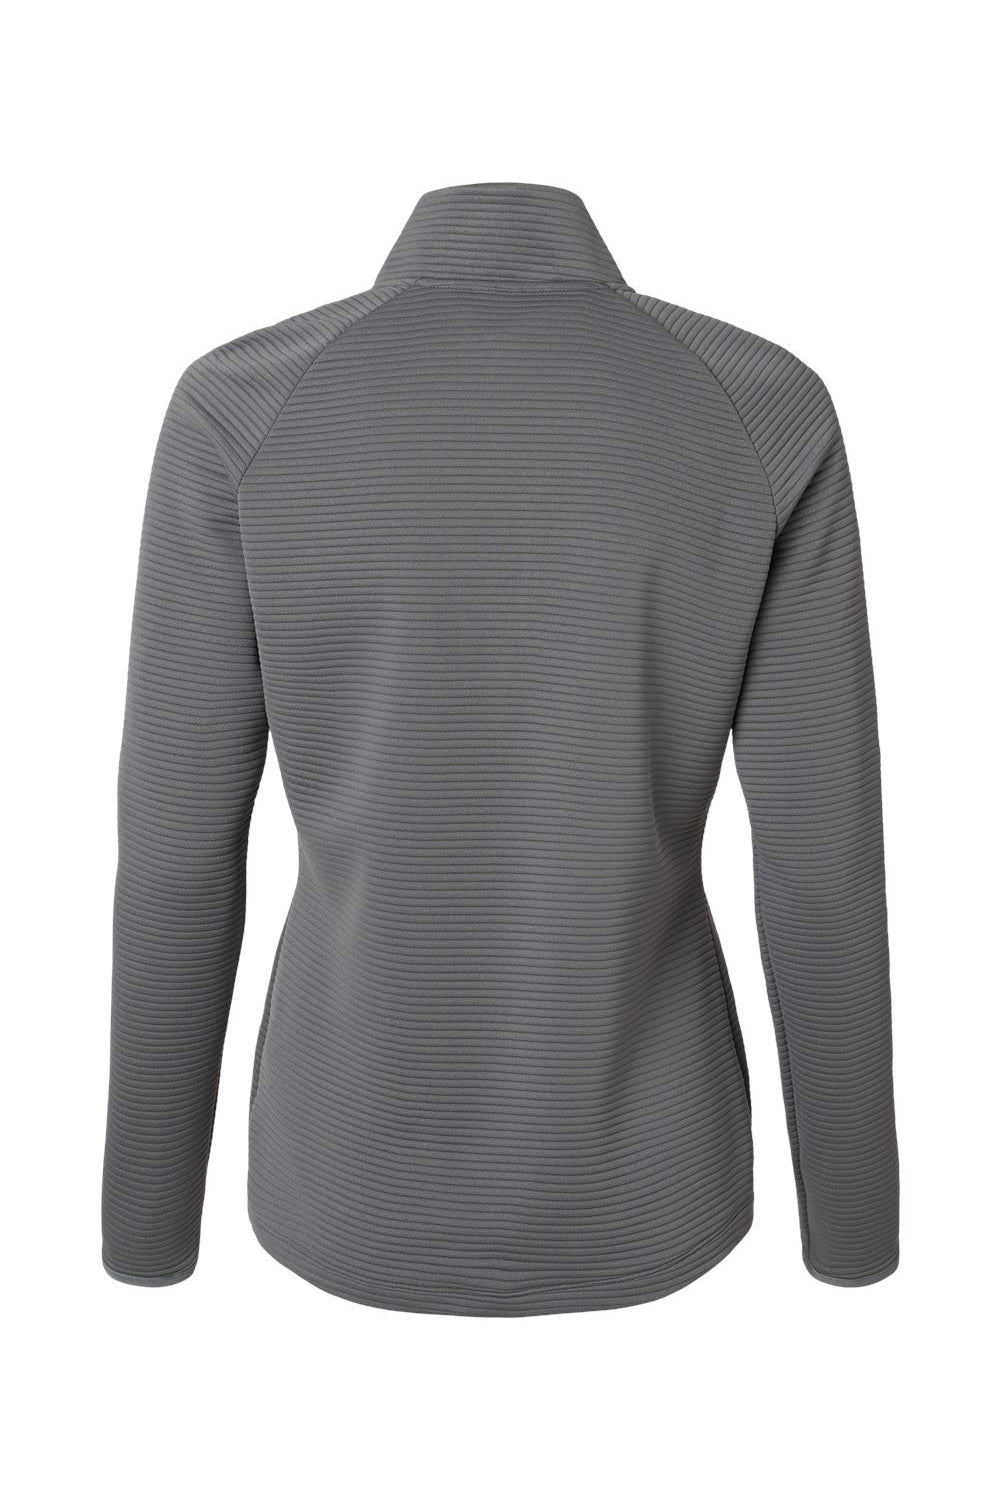 Adidas A589 Womens Spacer 1/4 Zip Pullover Grey Flat Back